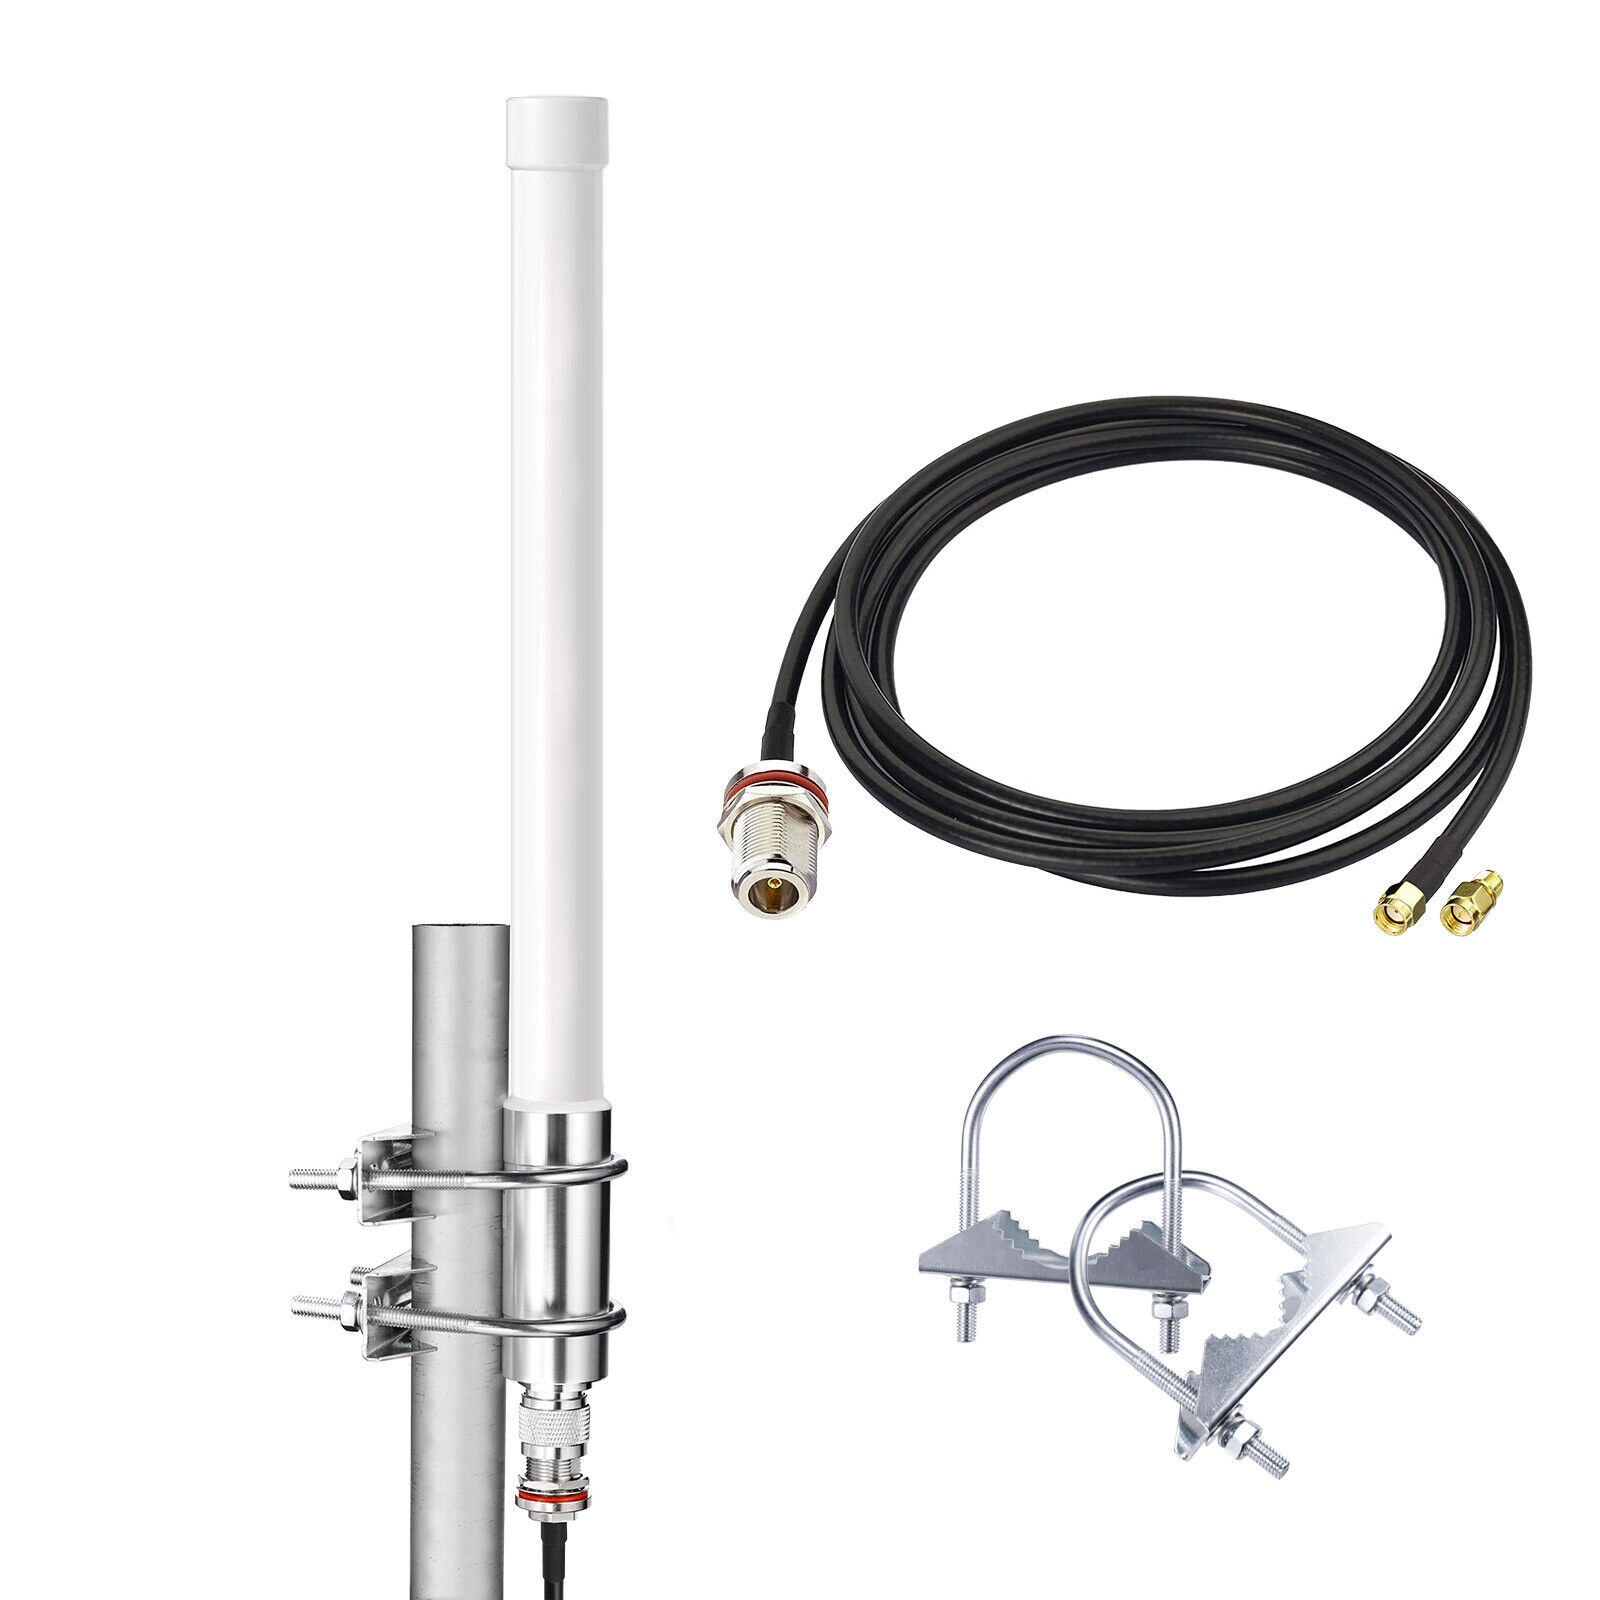 LoRa Gateway Antenna 3db Indoor Outdoor Glass Fiber SMA Cable for Helium Hotspot